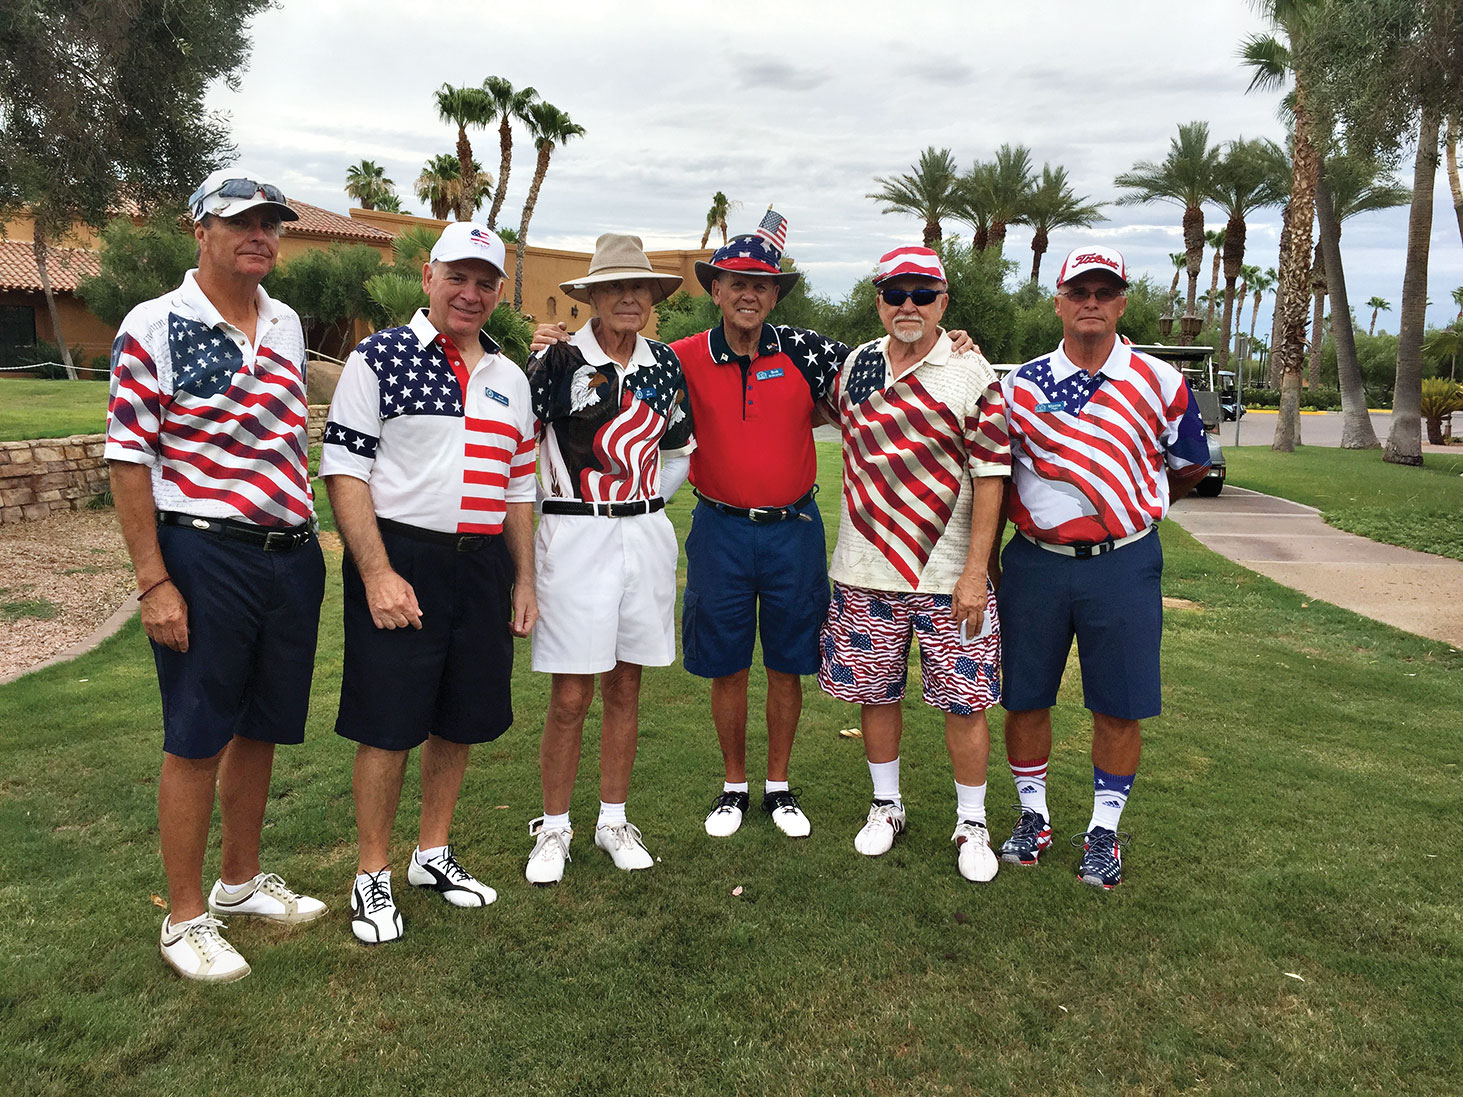 July 4 Costume Contest Participants – PCM9GA Red, White and Blue Tournament, left to right: Jeff Horan, Bob Mantucca, Ed White, Bob Schrader, Walter Hohlstein – Contest Winner Monte Page, president of PCM9GA